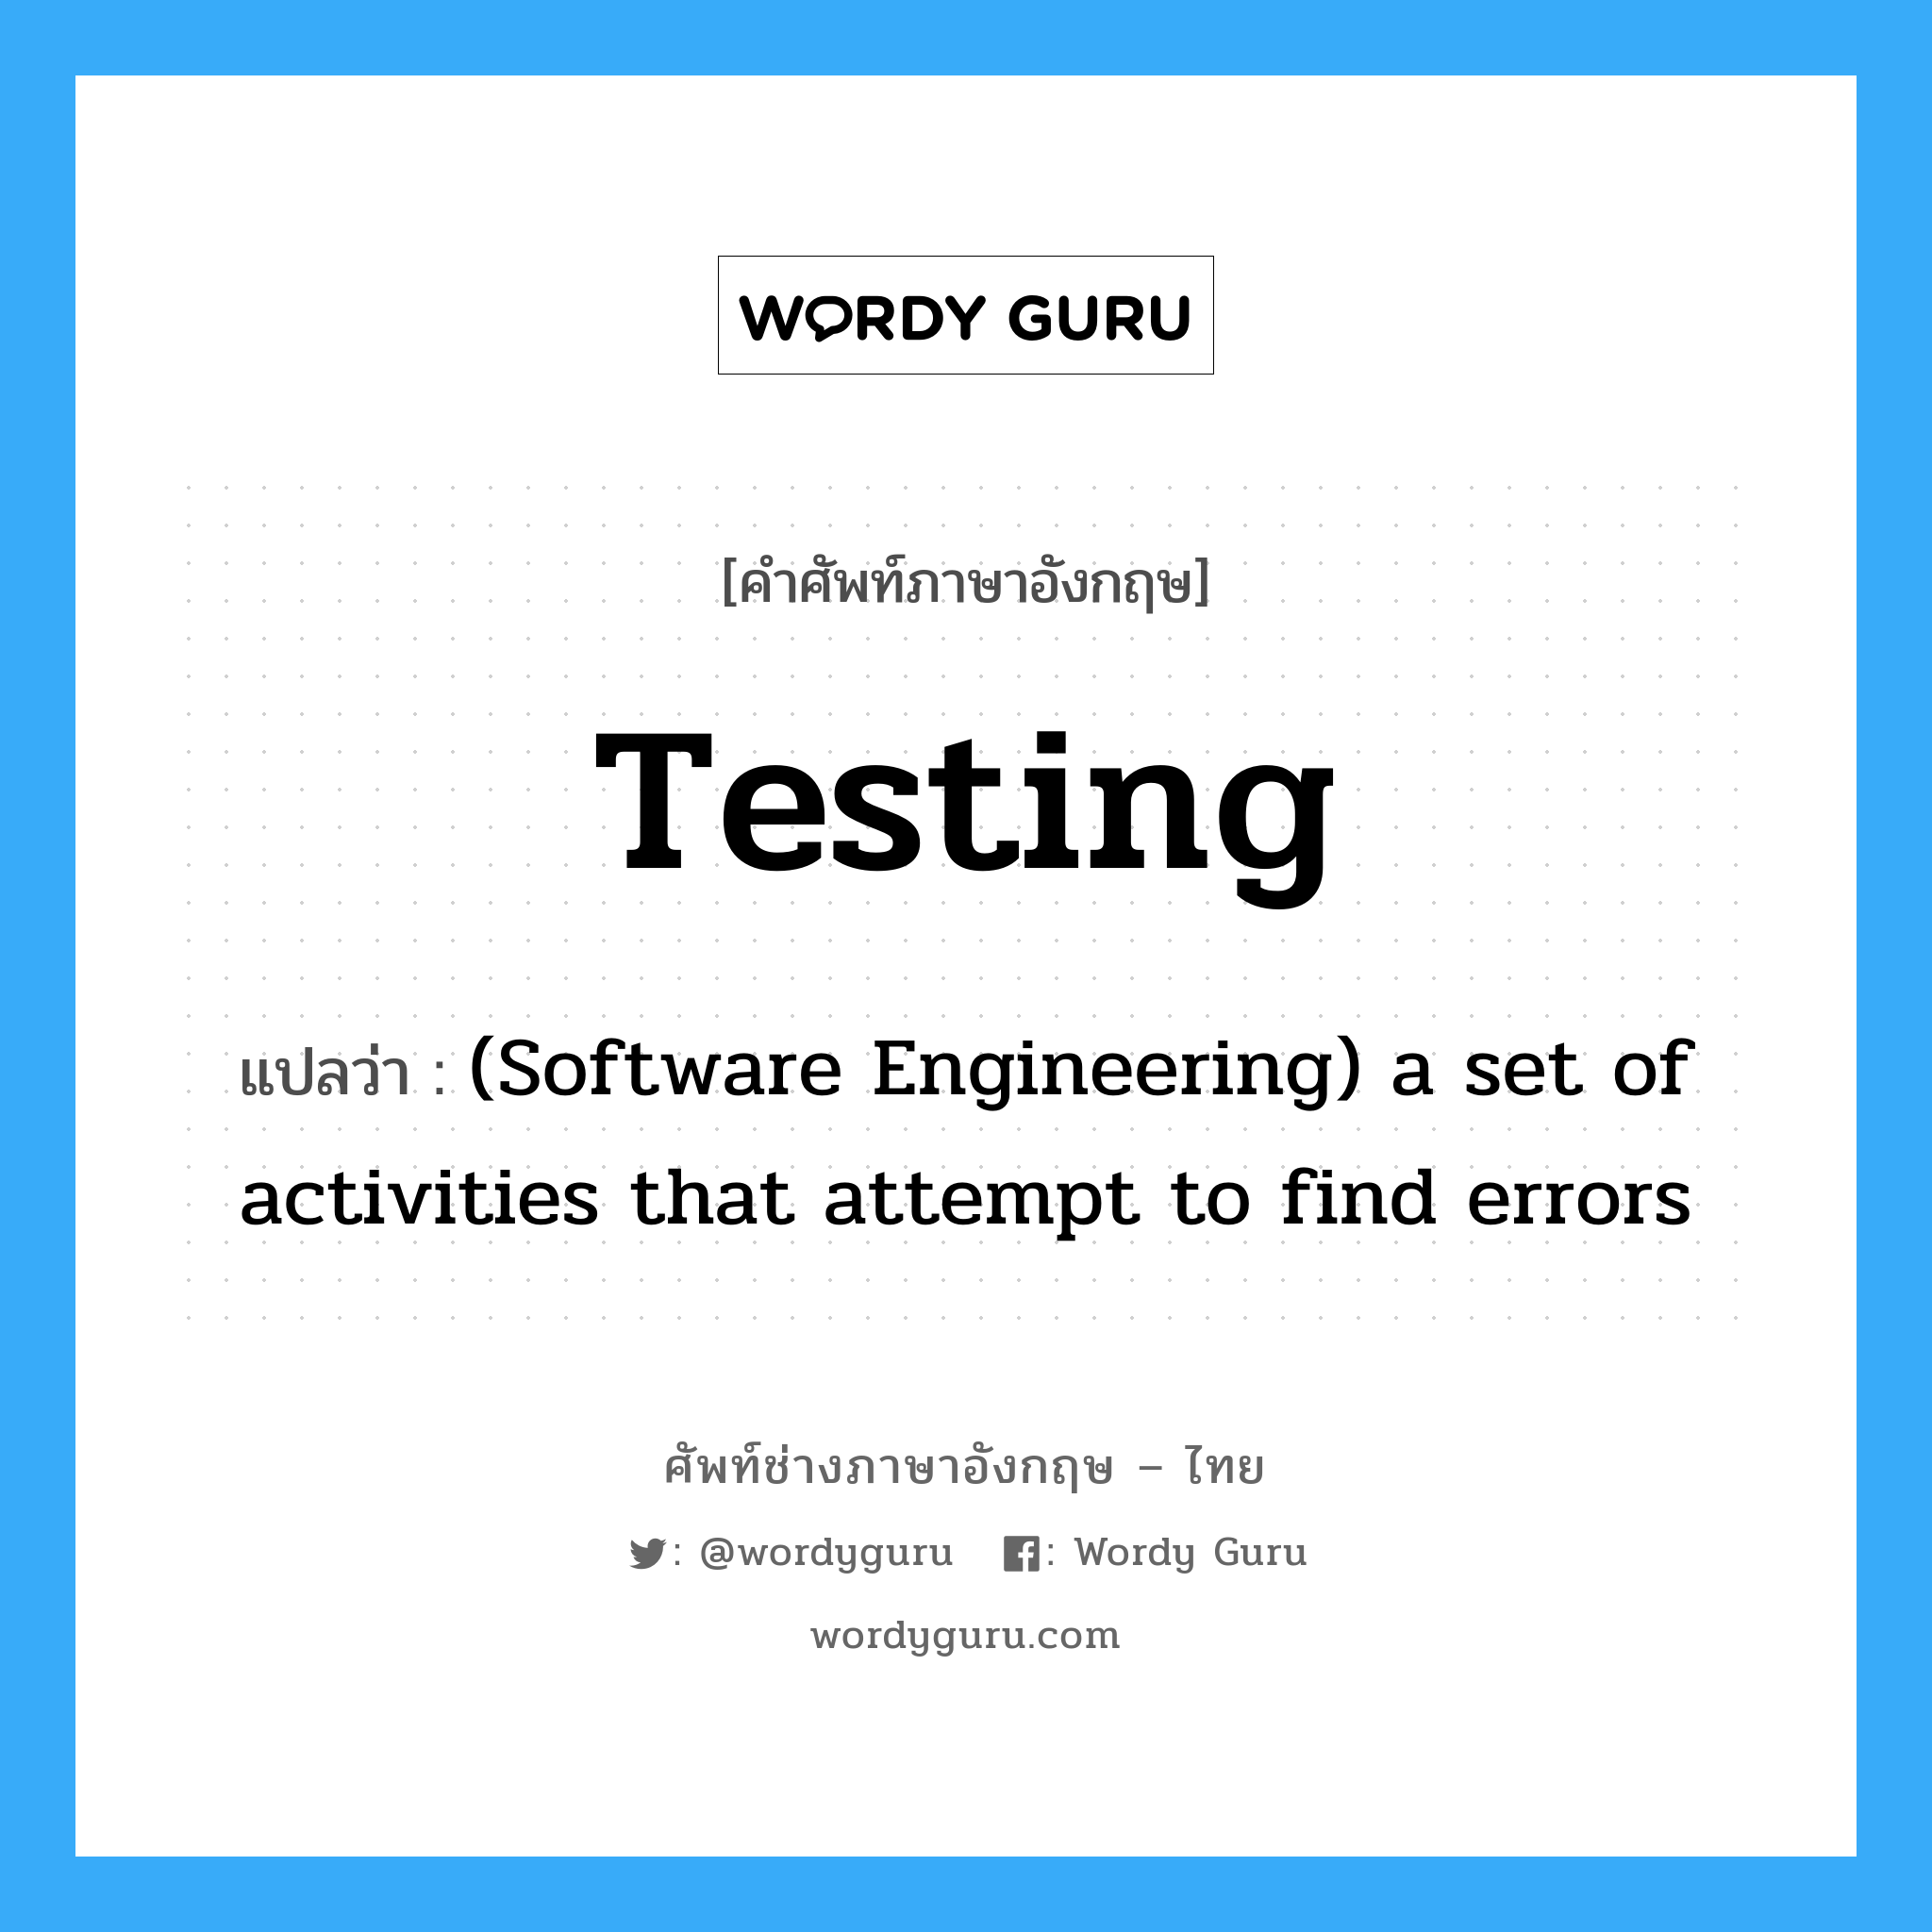 (Software Engineering) a set of activities that attempt to find errors ภาษาอังกฤษ?, คำศัพท์ช่างภาษาอังกฤษ - ไทย (Software Engineering) a set of activities that attempt to find errors คำศัพท์ภาษาอังกฤษ (Software Engineering) a set of activities that attempt to find errors แปลว่า Testing